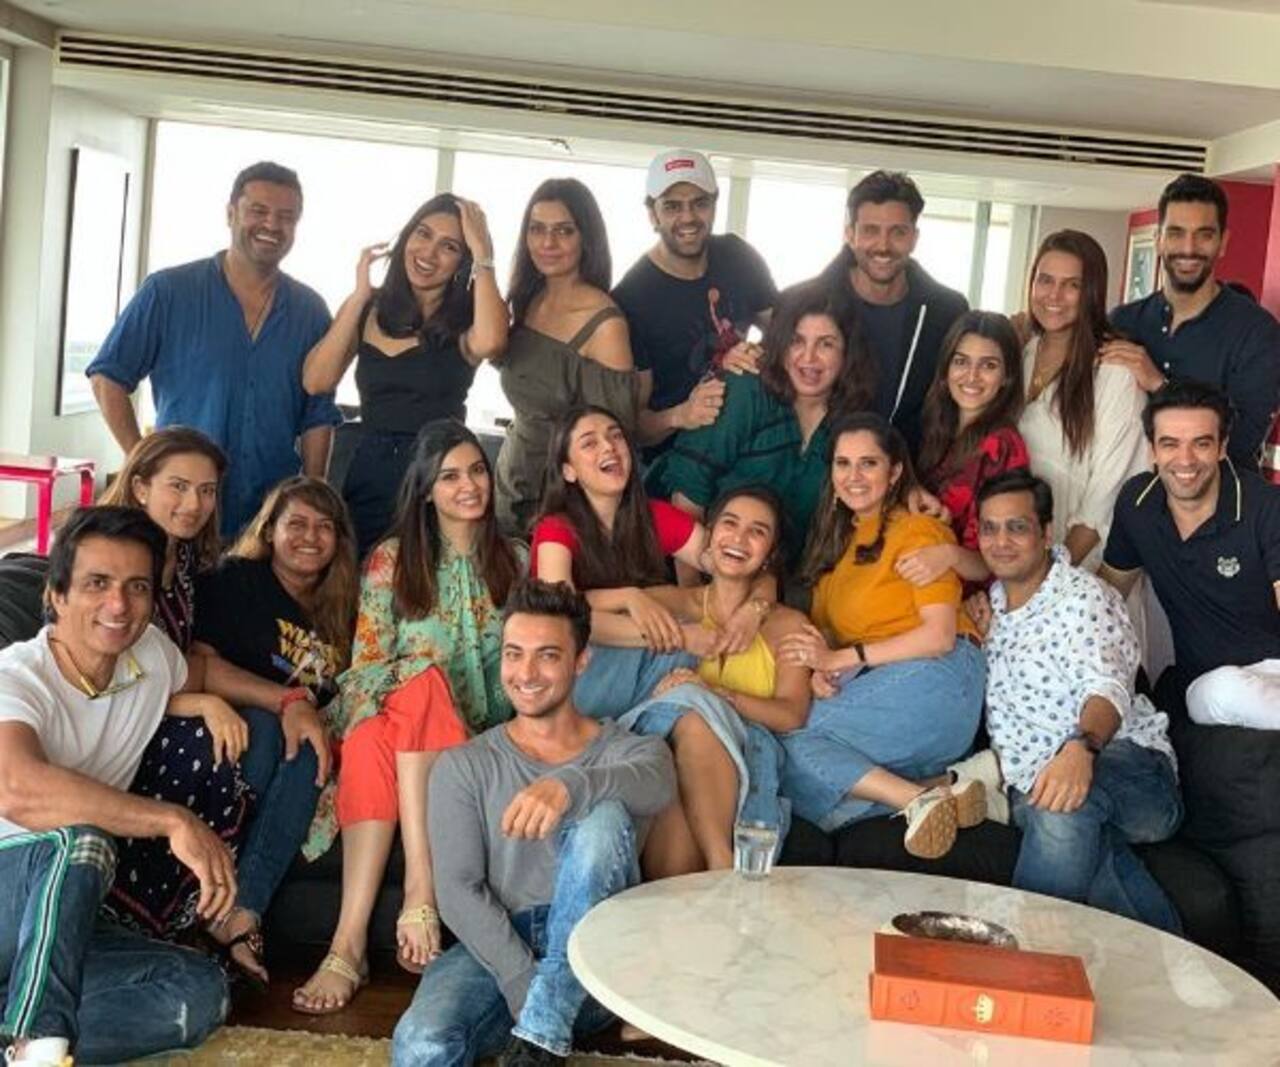 Hrithik Roshan, Vikas Bahl, Kriti Sanon and others fall short of being 'Super 30' at Farah Khan's lunch party